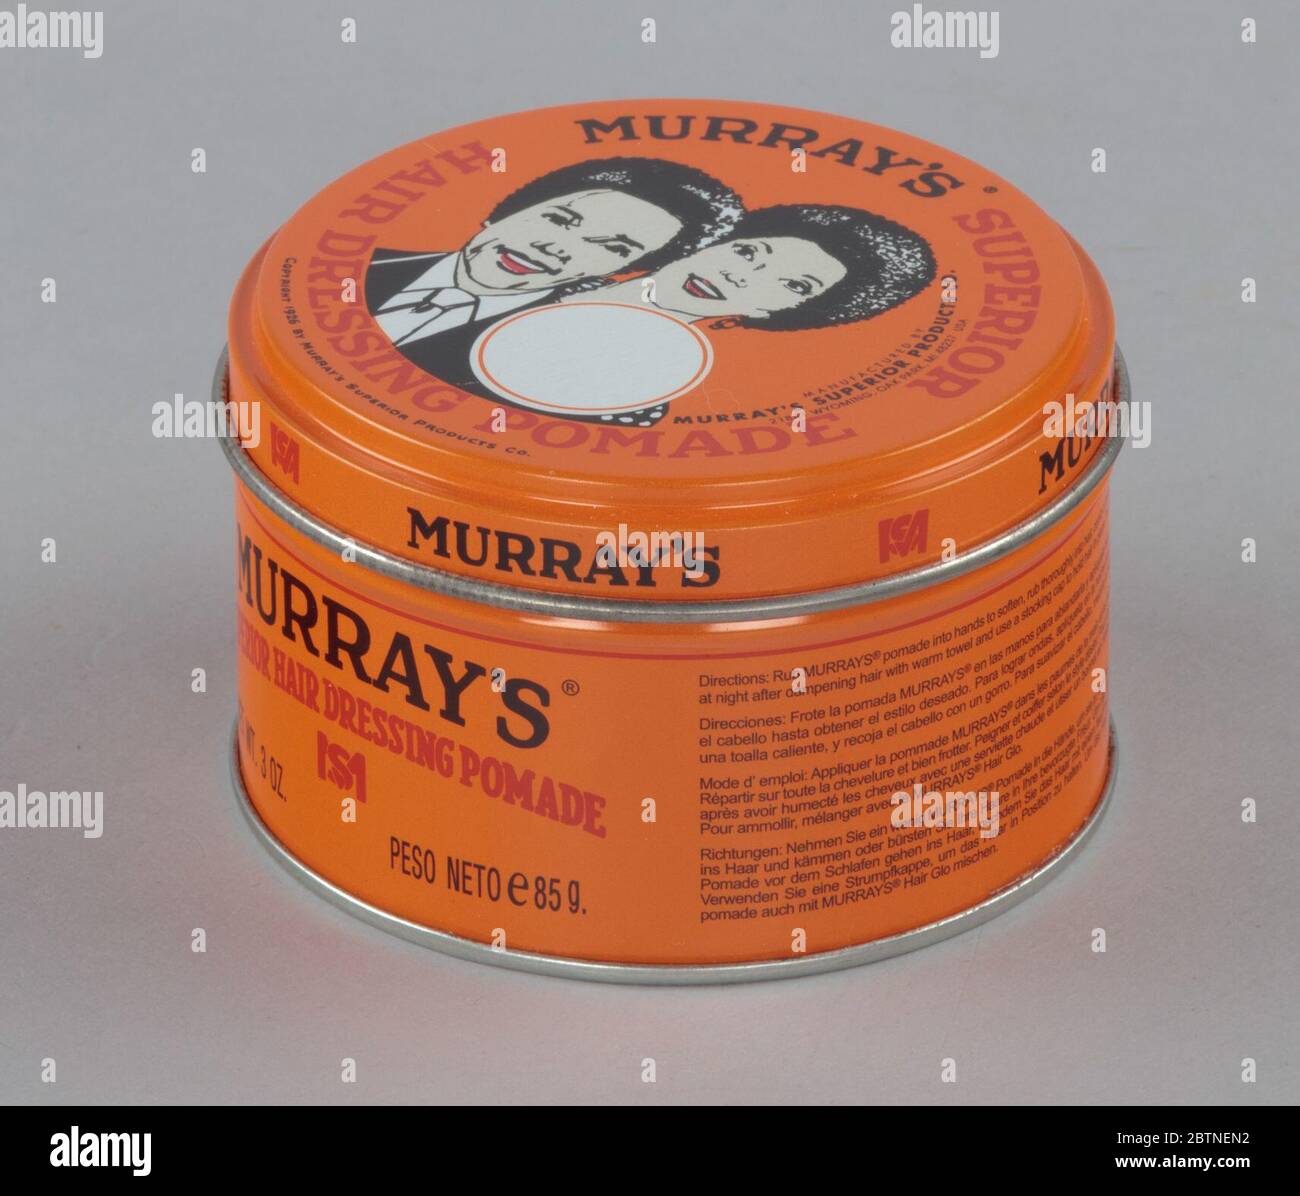 Tin for Murrays Superior Hair Dressing Pomade. A round and metal  orange-colored tin of Murray's Superior Hair Dressing Pomade Stock Photo -  Alamy